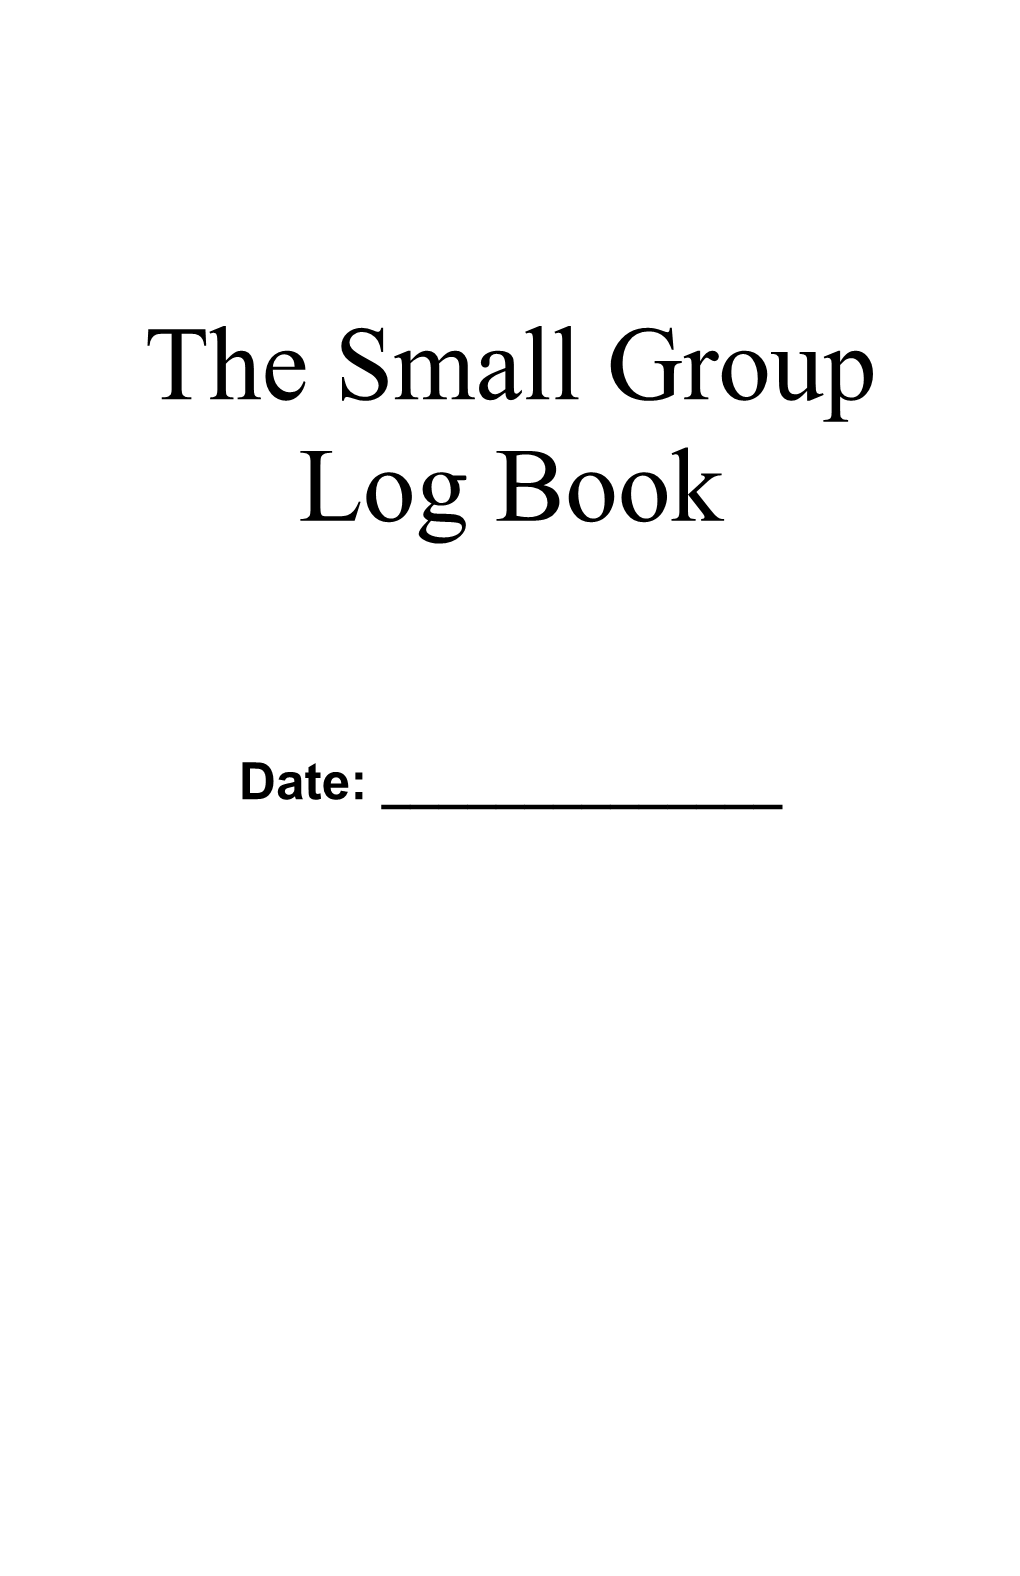 The Small Group